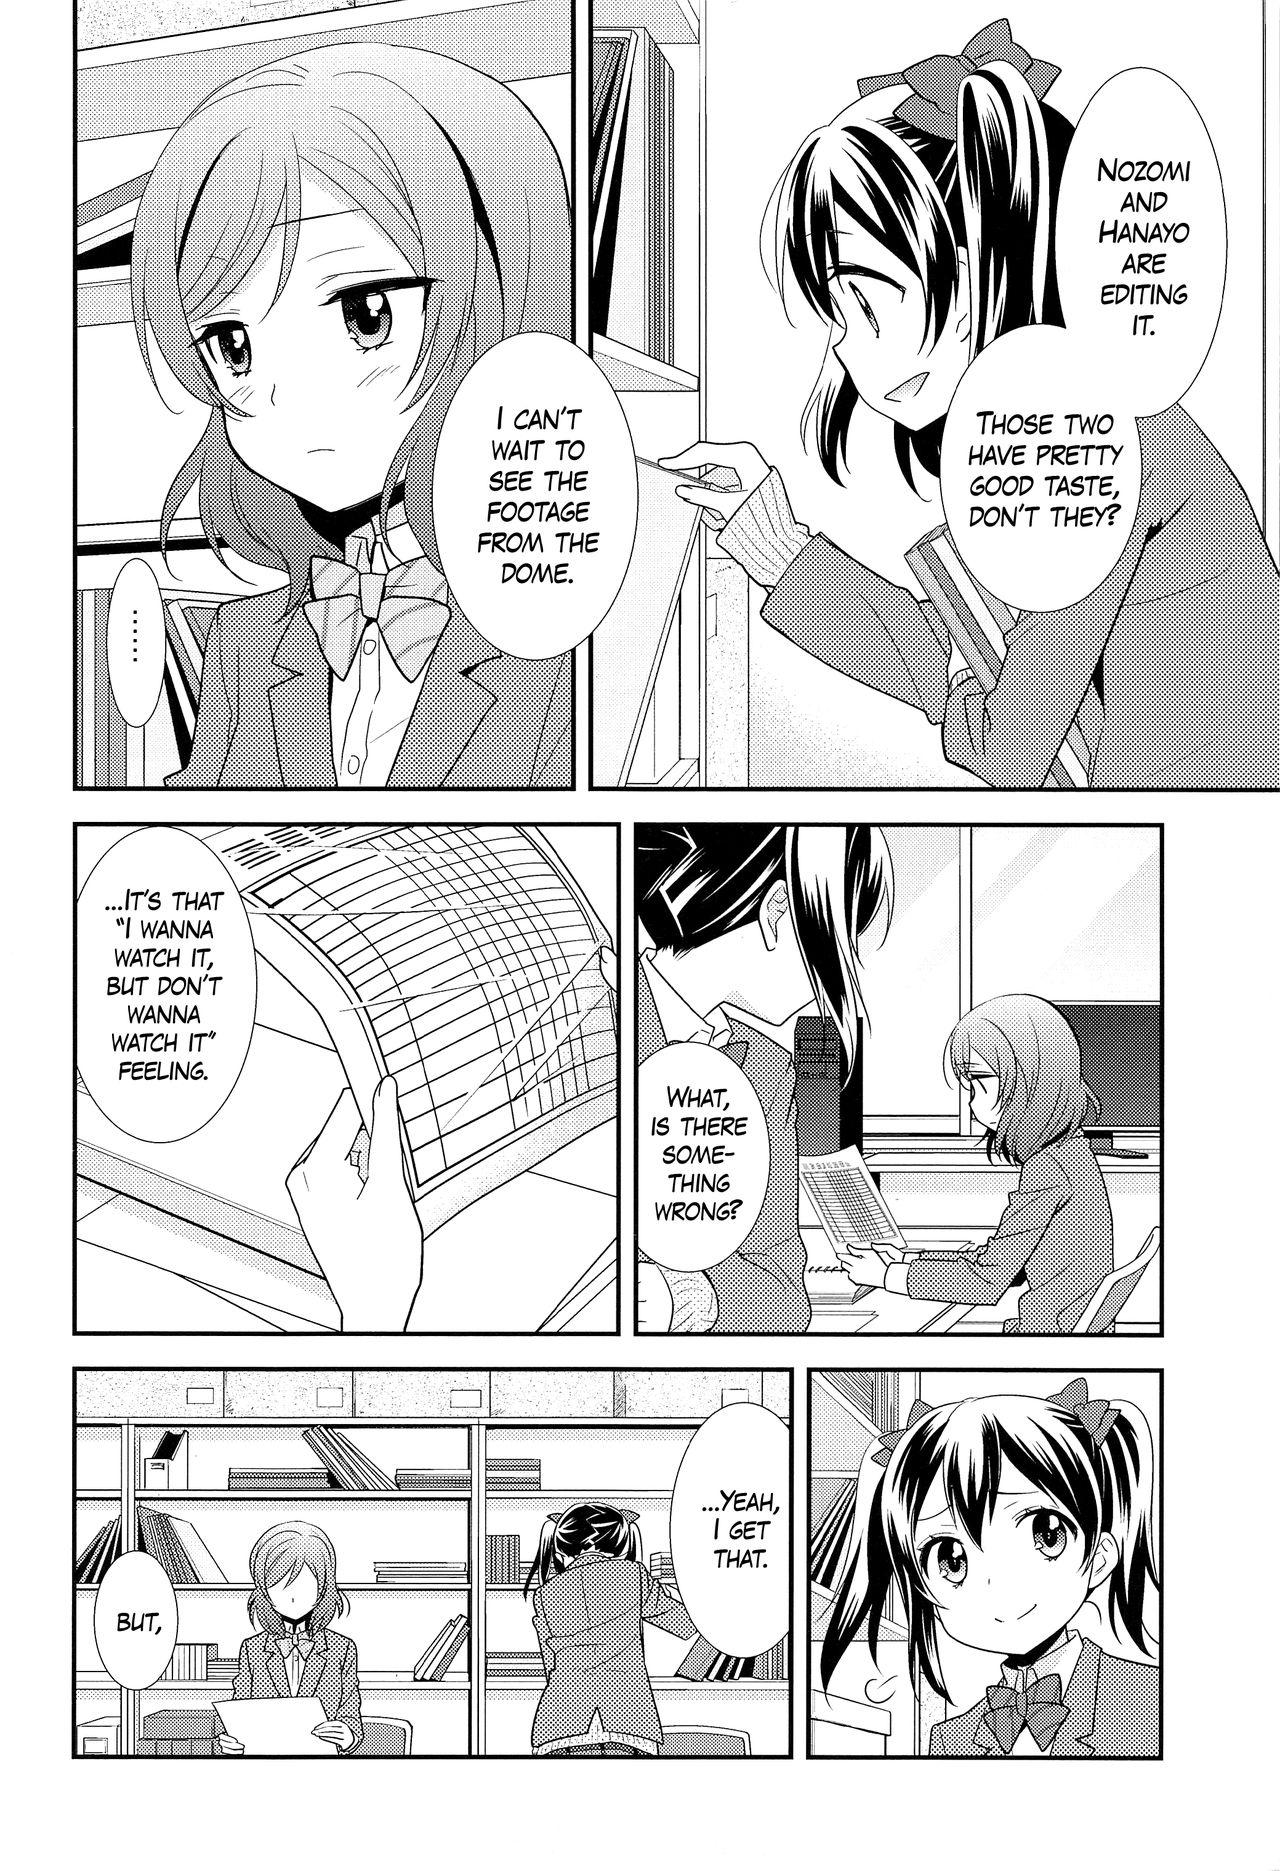 Butts Bokura no Te ni wa Ai Shika nai. | There’s Nothing but Love In Our Hands. - Love live Firsttime - Page 8